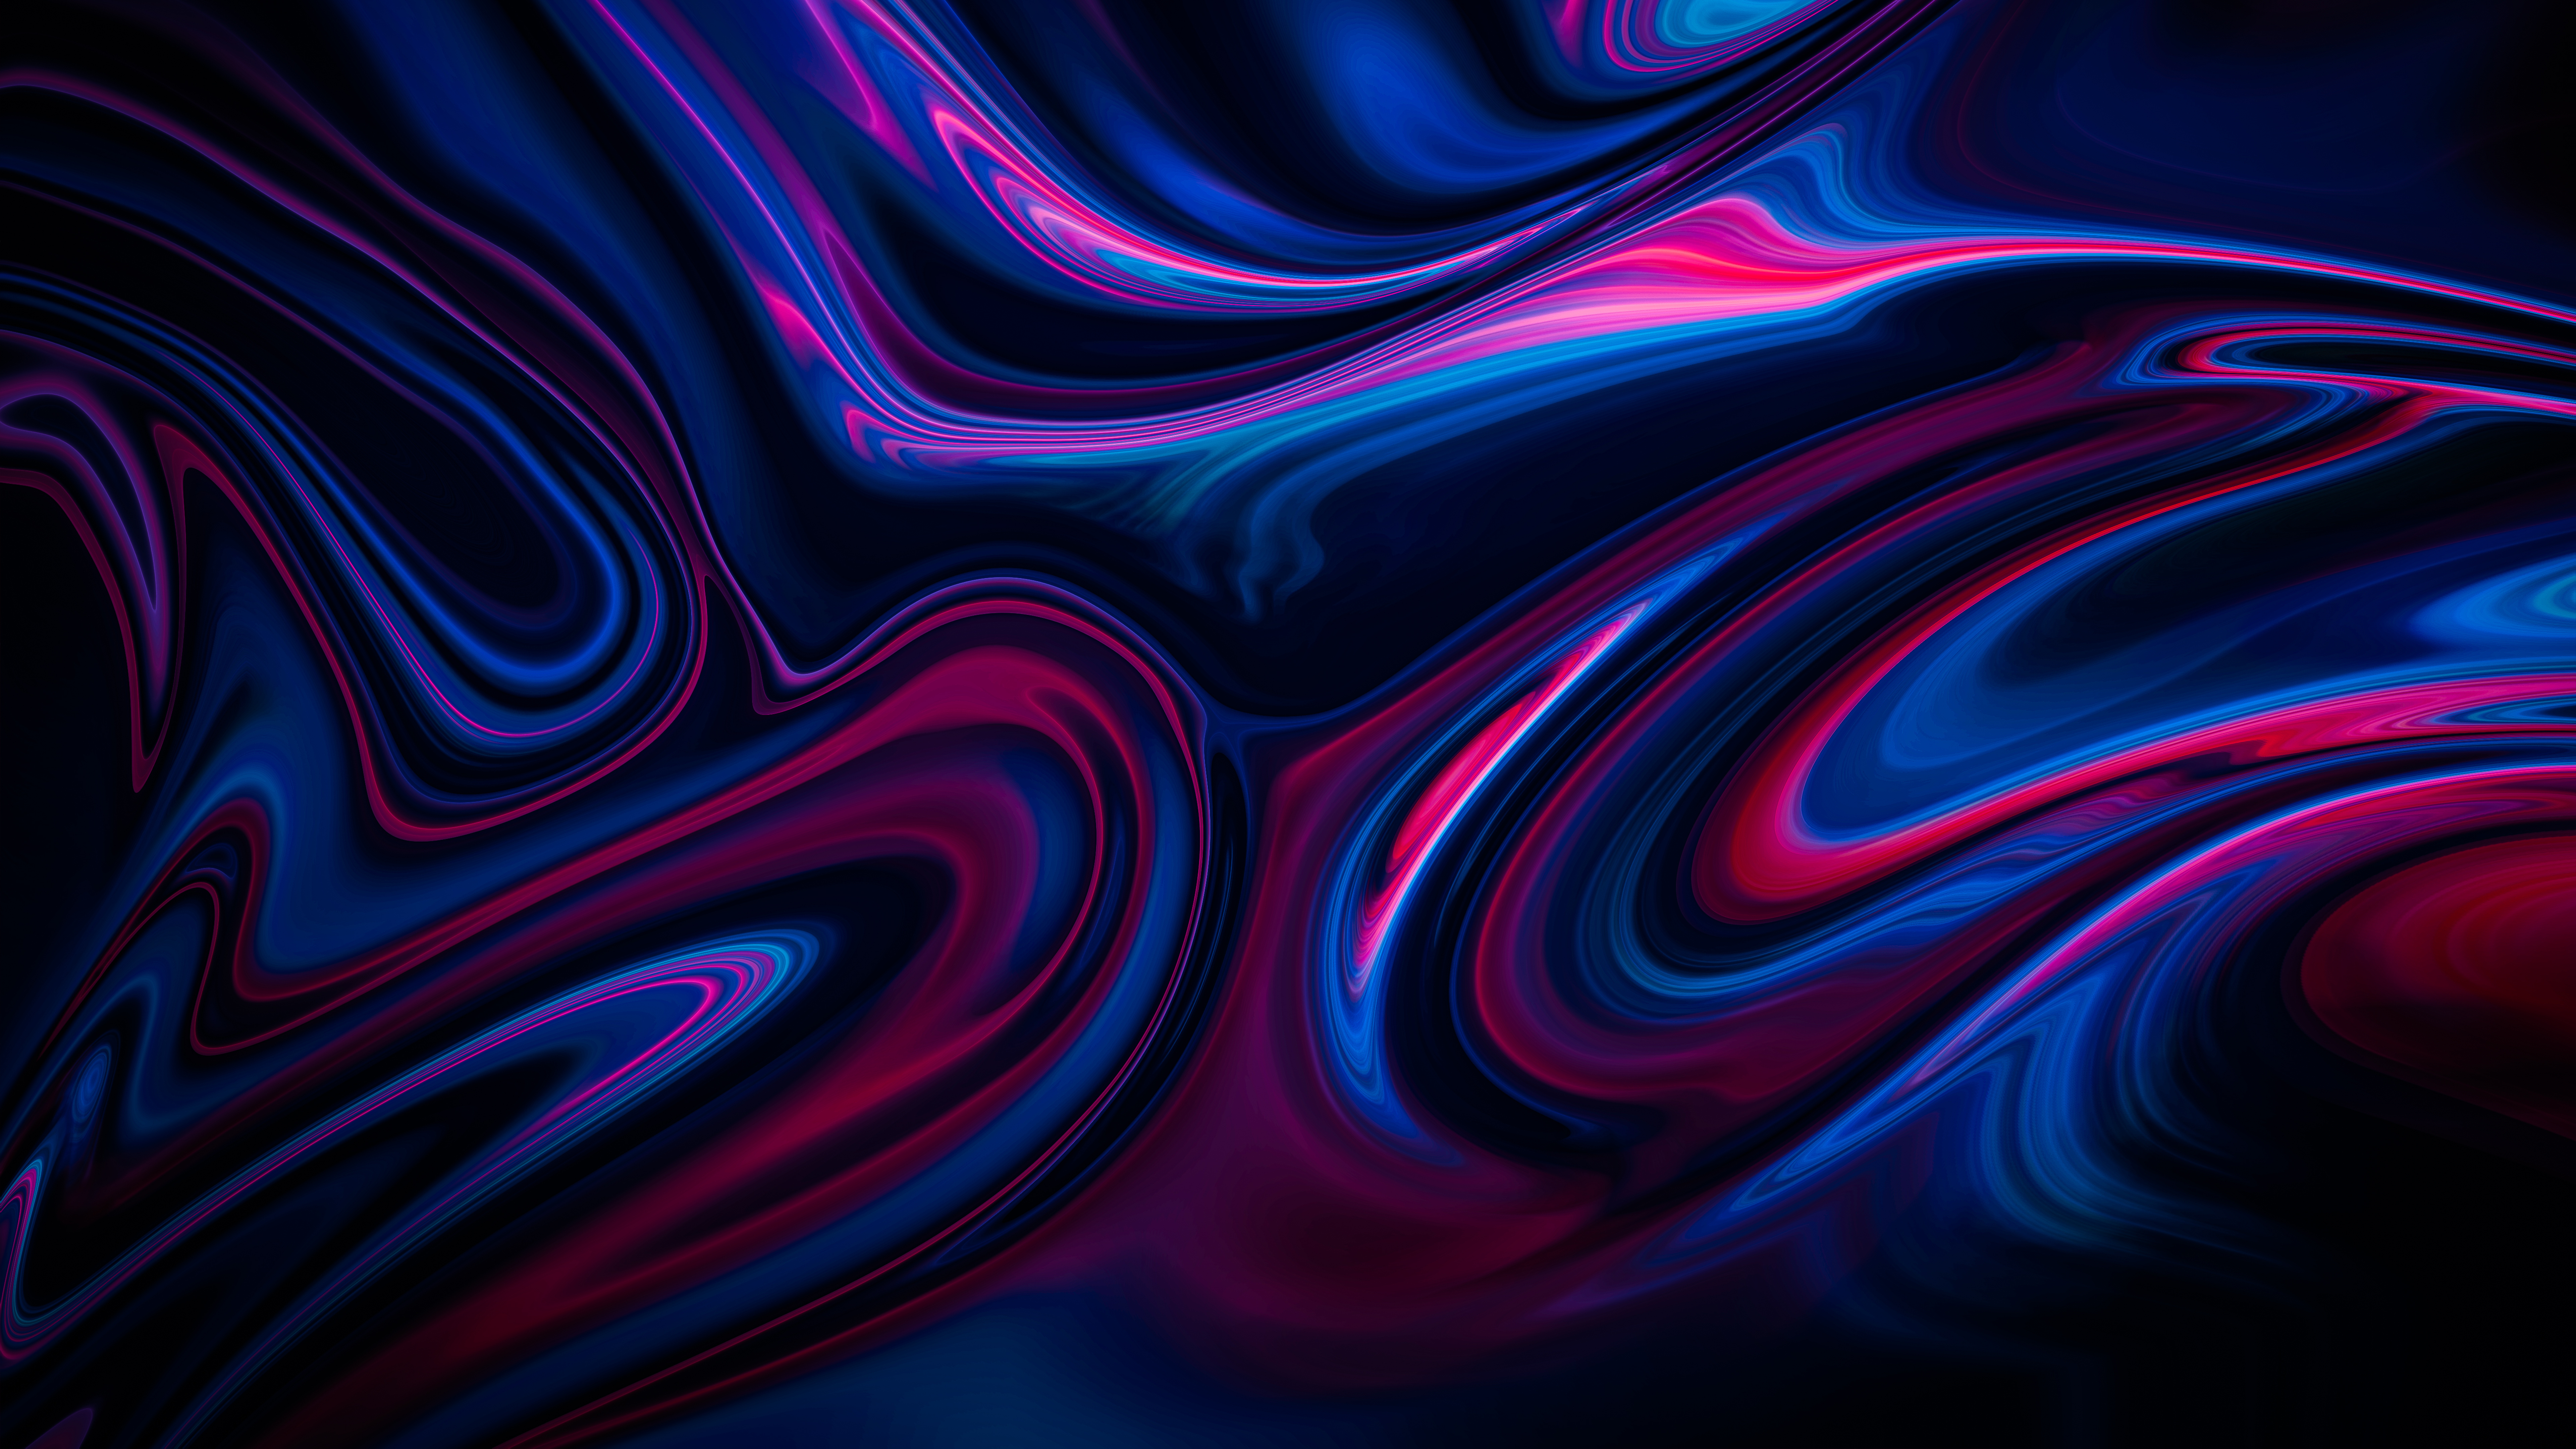 7680x4320 Material Style 8k 8k HD 4k Wallpapers, Images